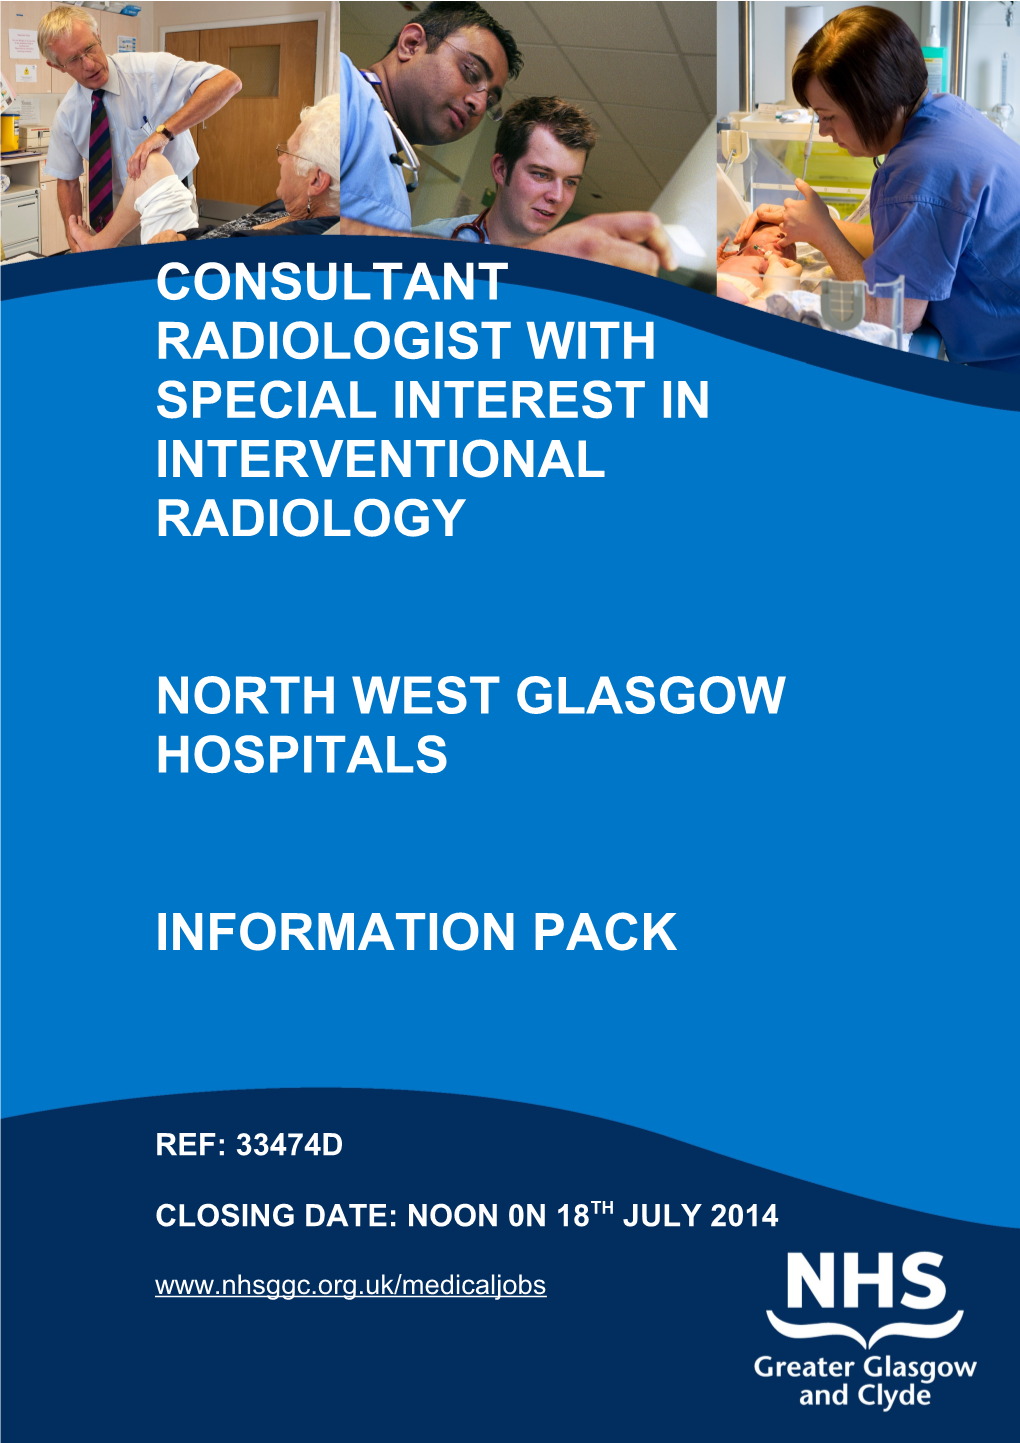 Consultant Radiologist with Special Interest in Interventional Radiology